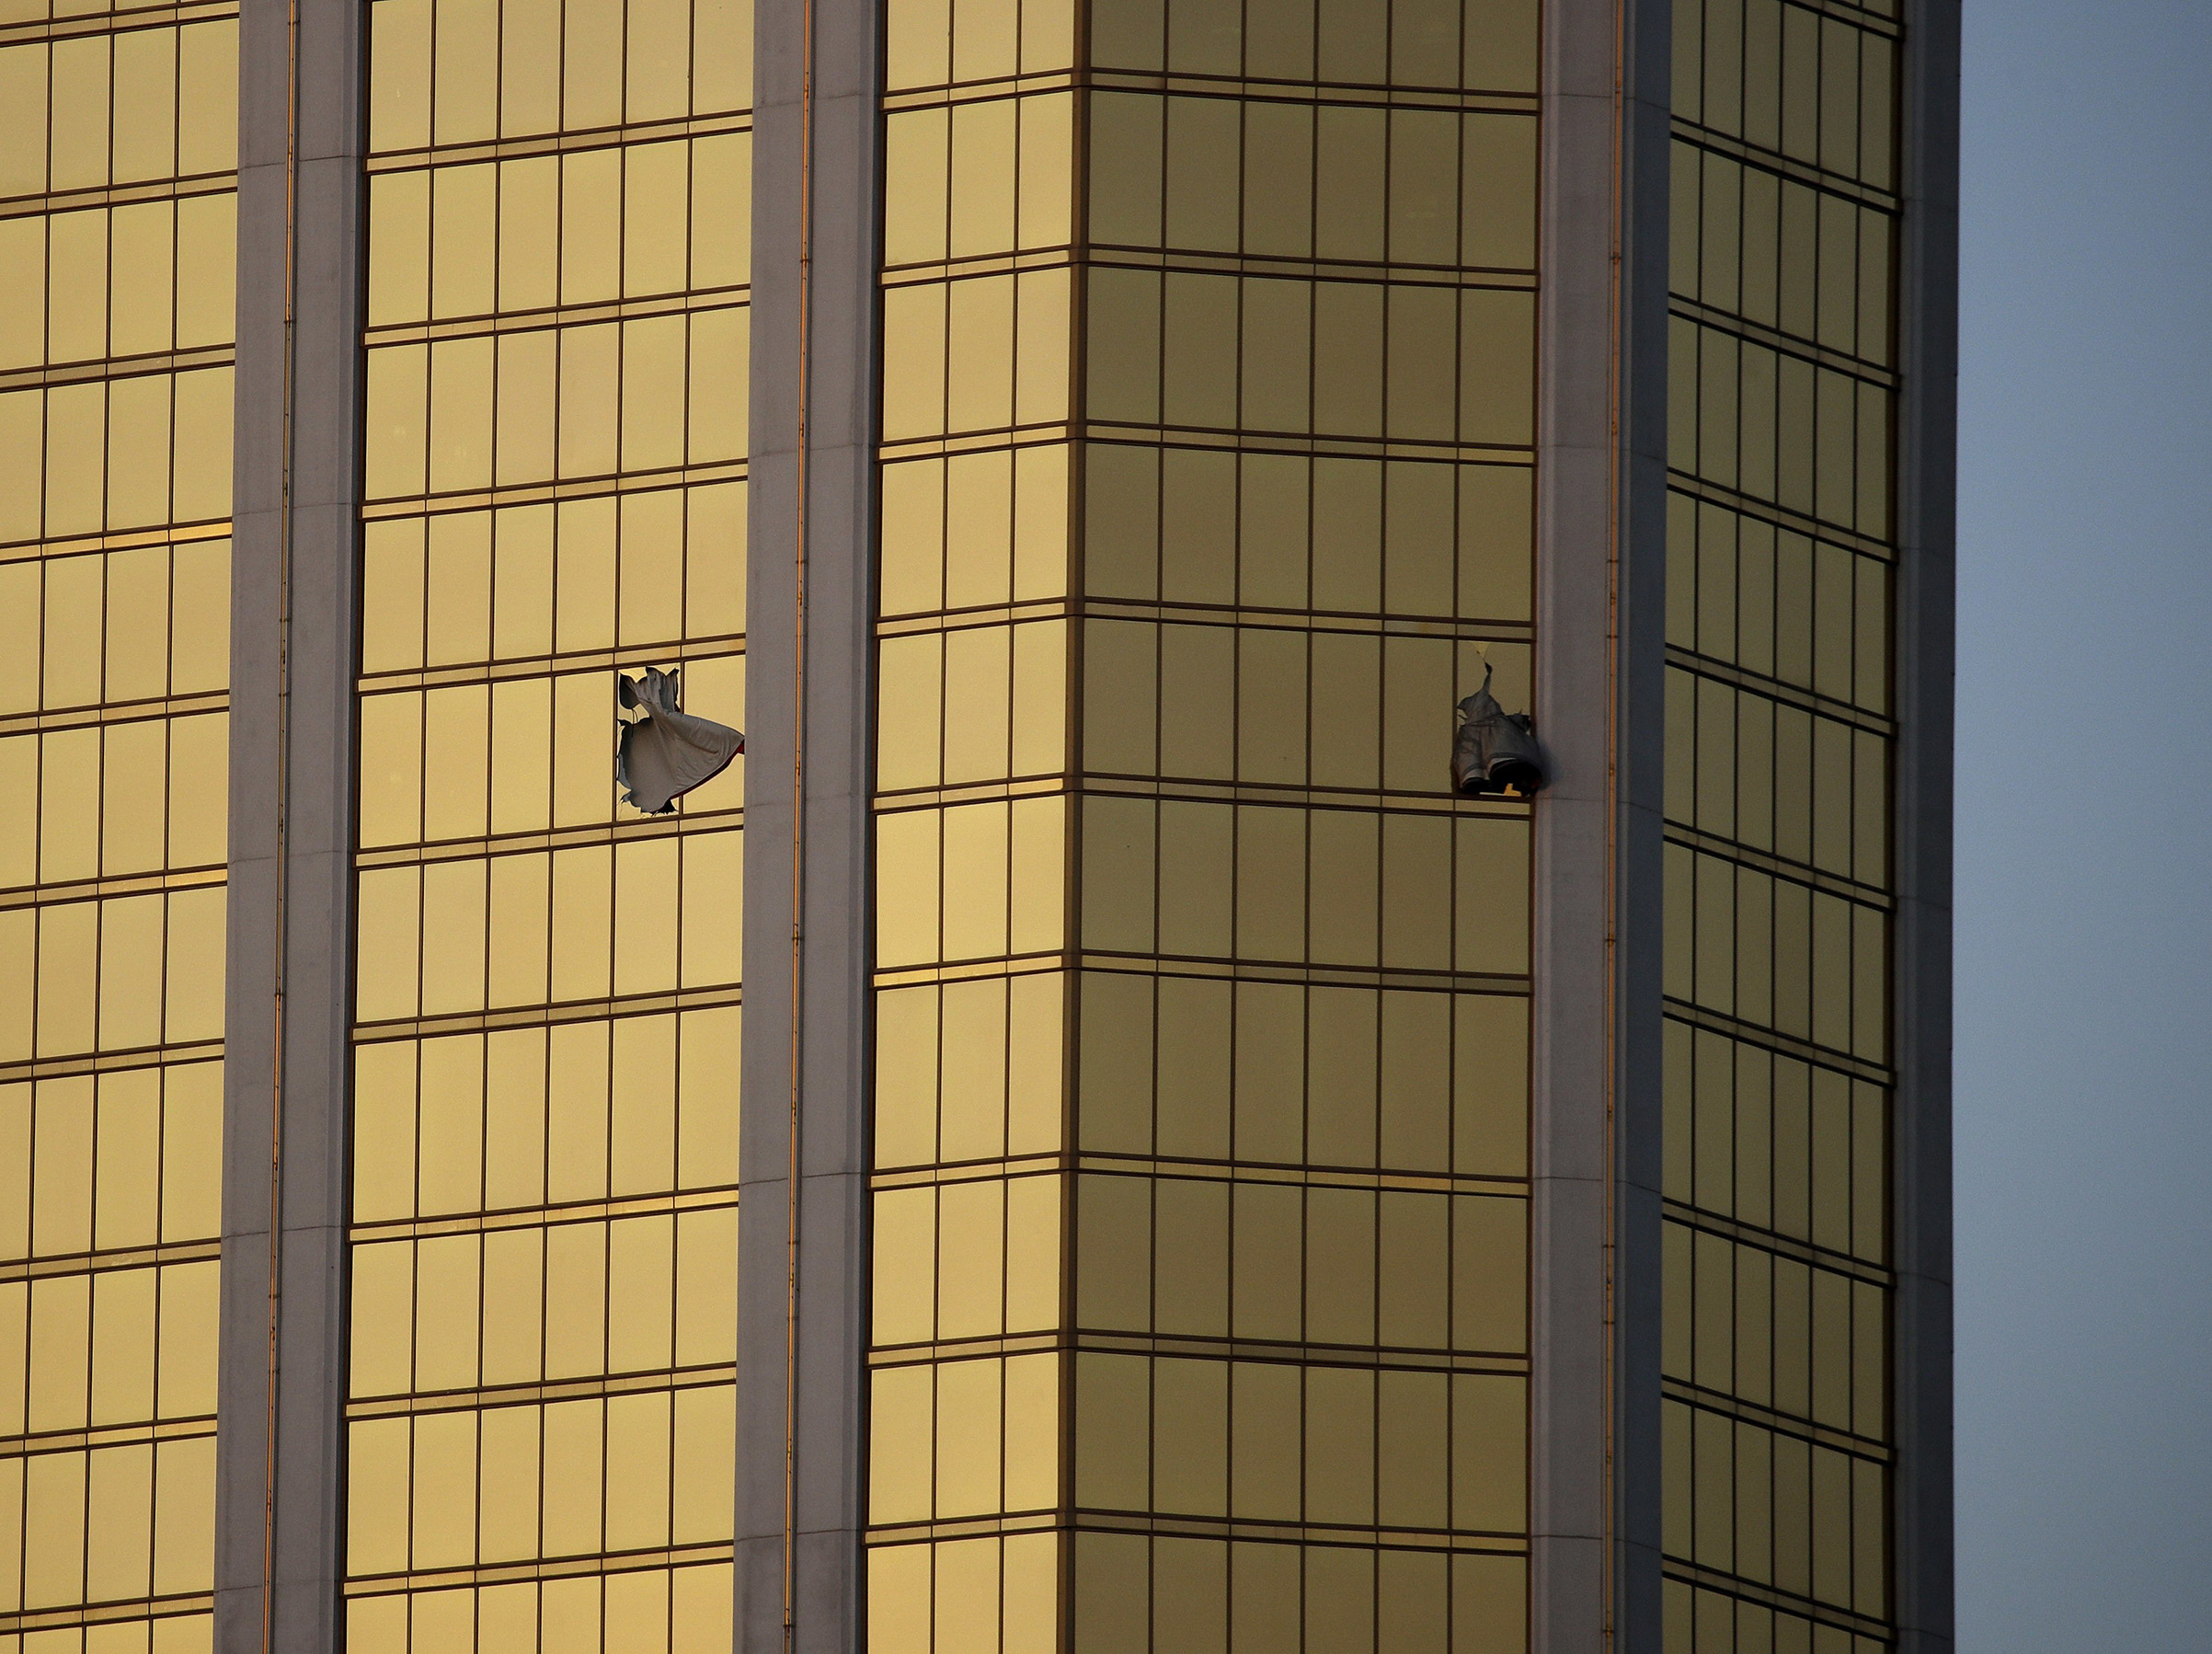 Drapes billow out of broken windows at the Mandalay Bay resort and casino, on the Las Vegas Strip following a deadly shooting at a music festival in Las Vegas on Oct 2, 2017. (John Locher—AP/Shutterstock)